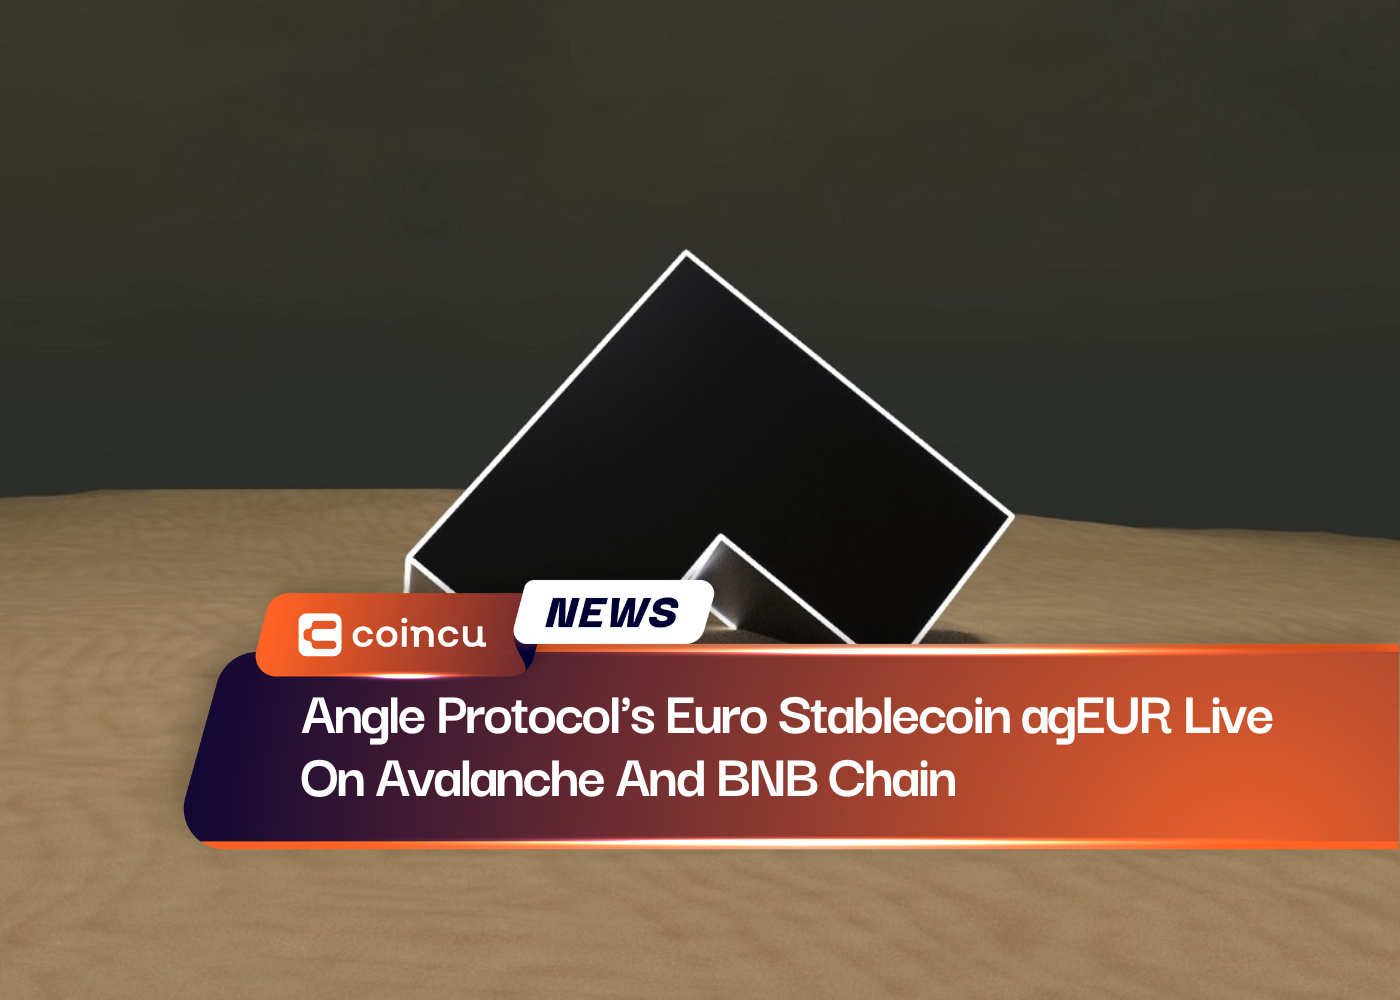 Angle Protocol's Euro Stablecoin agEUR Live On Avalanche And BNB Chain